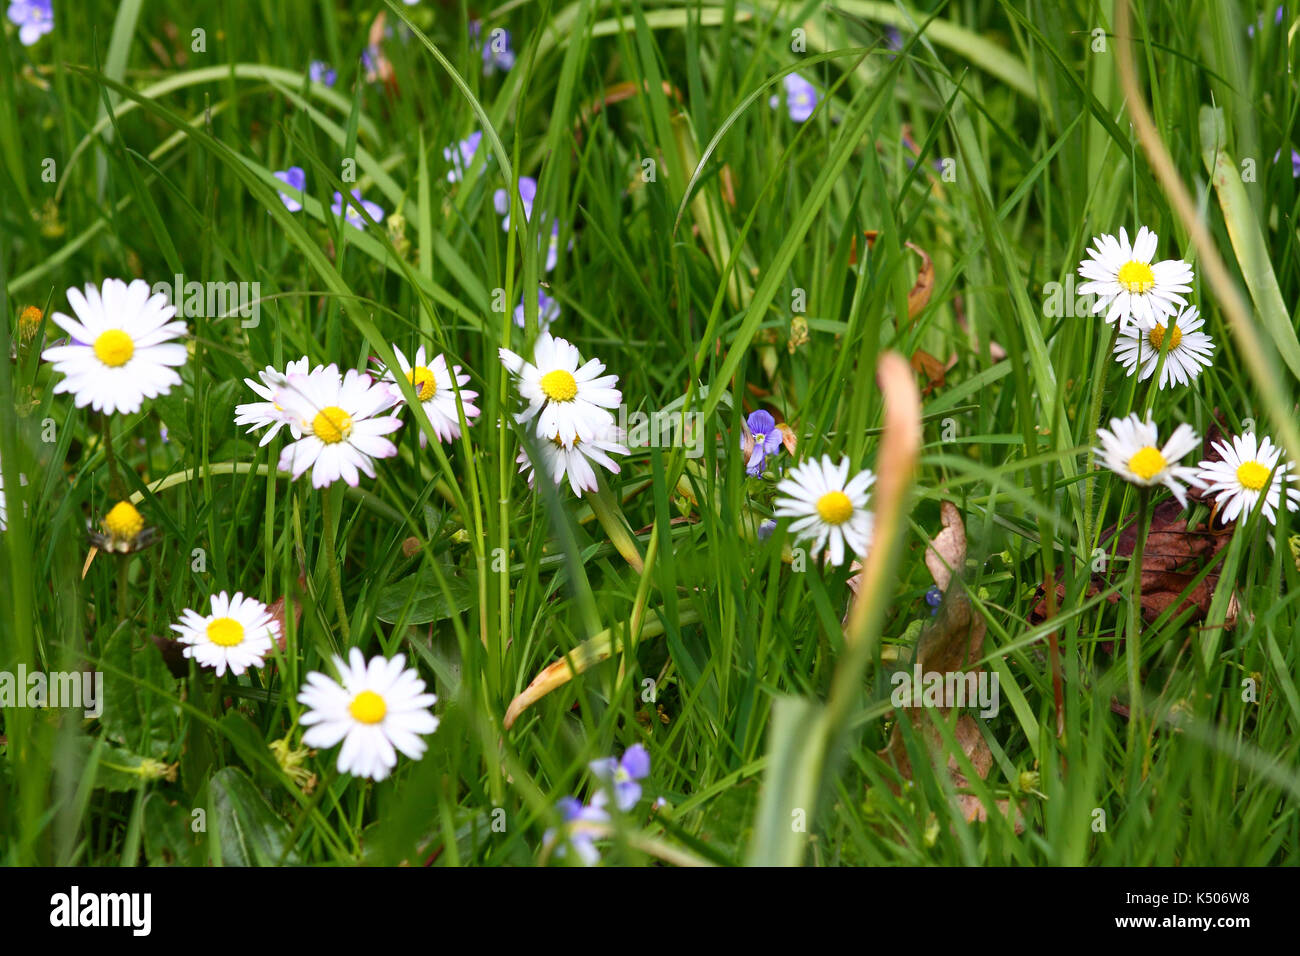 Daisies growing a field Stock Photo